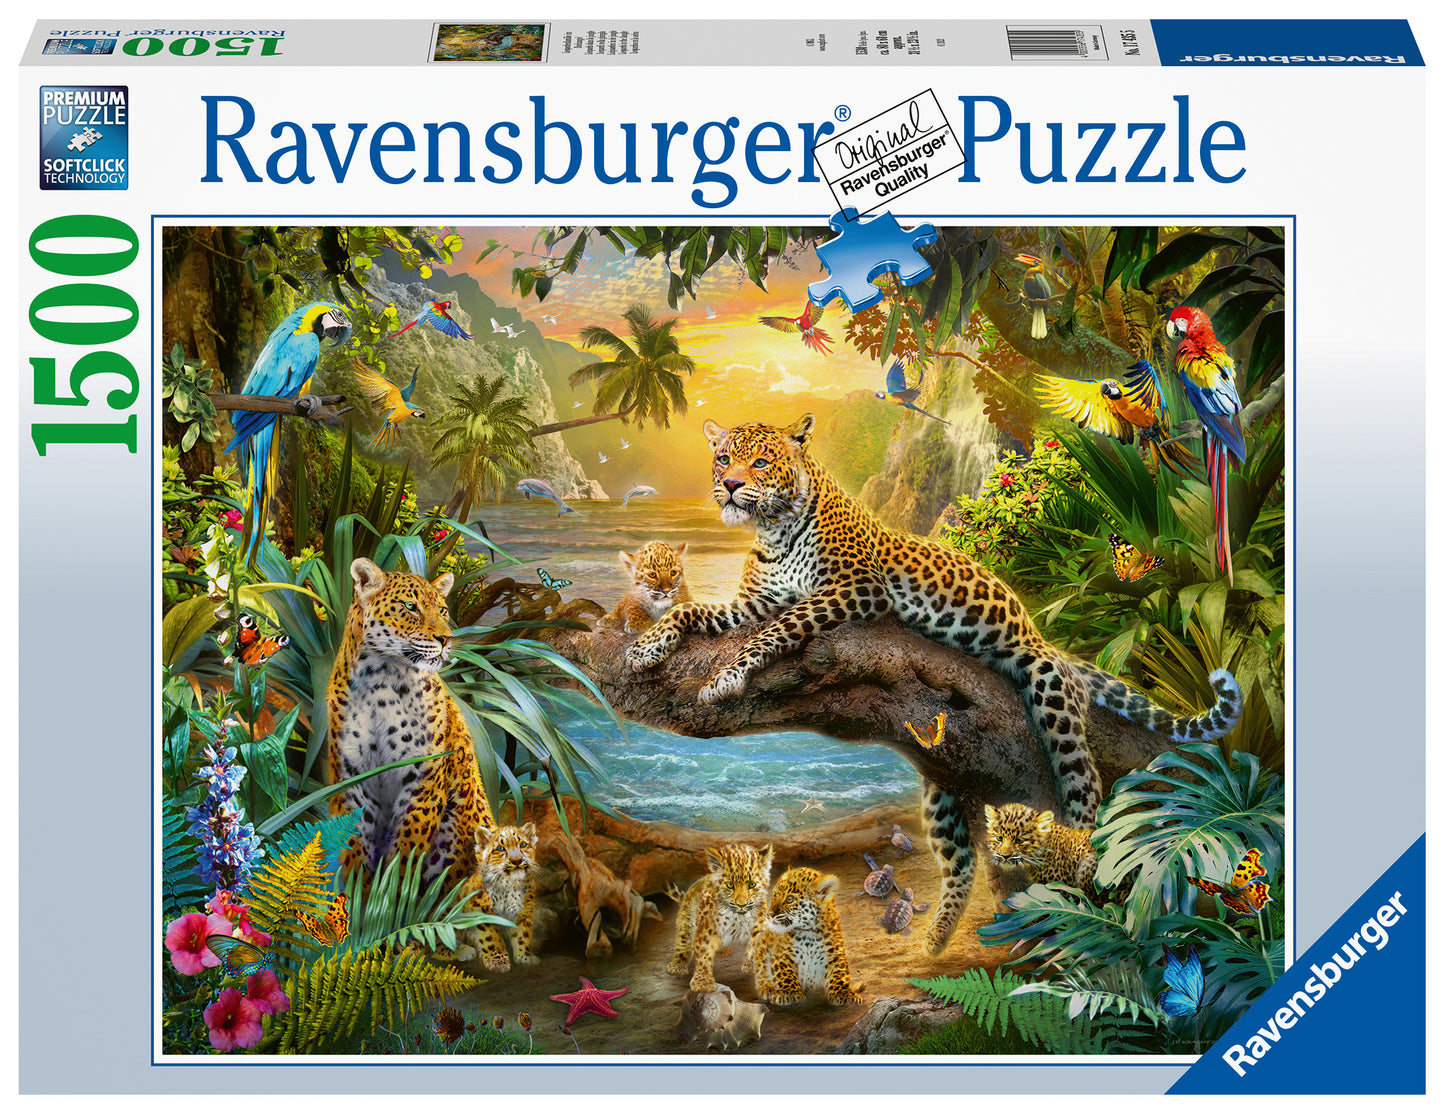 Ravensburger - Leopards in the Jungle - 1500 Piece Jigsaw Puzzle